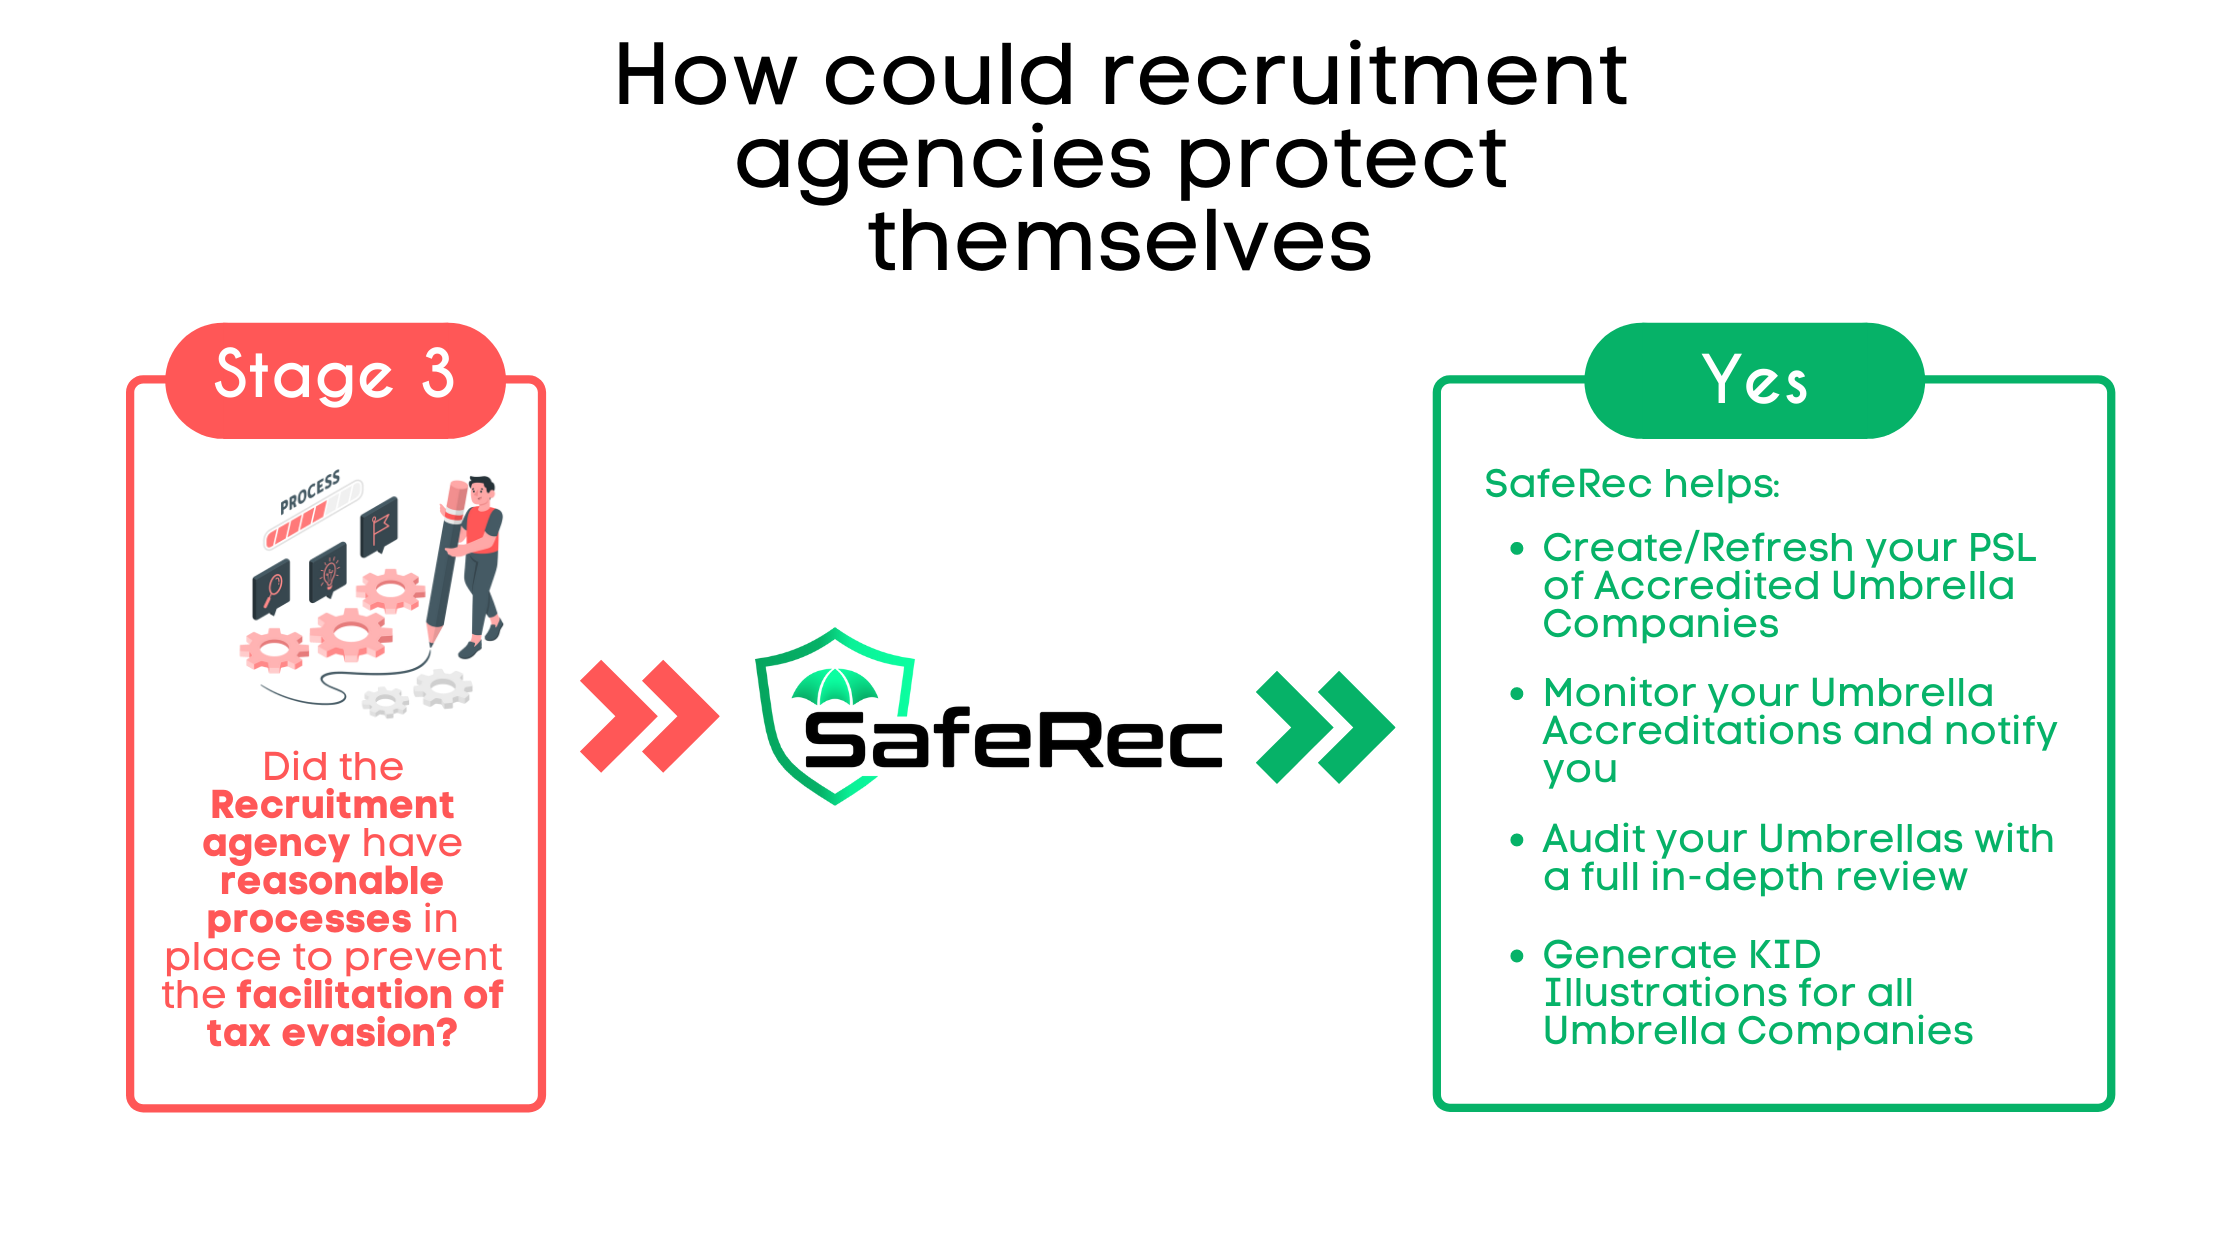 How could Recruitment Agencies protect themselves?